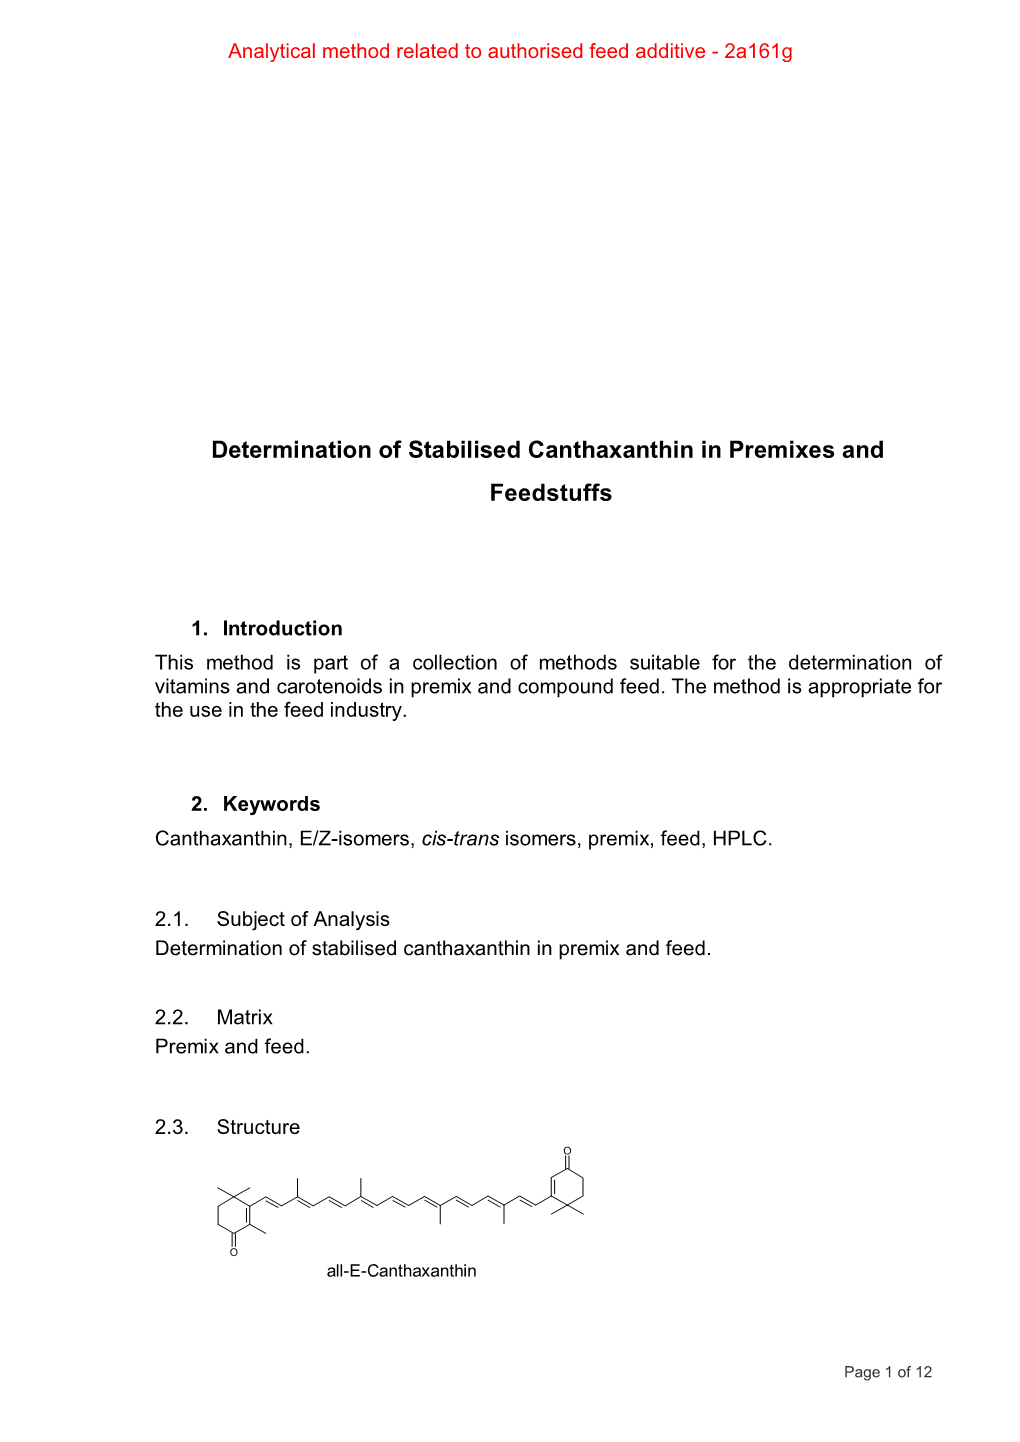 Determination of Stabilised Canthaxanthin in Premixes and Feedstuffs